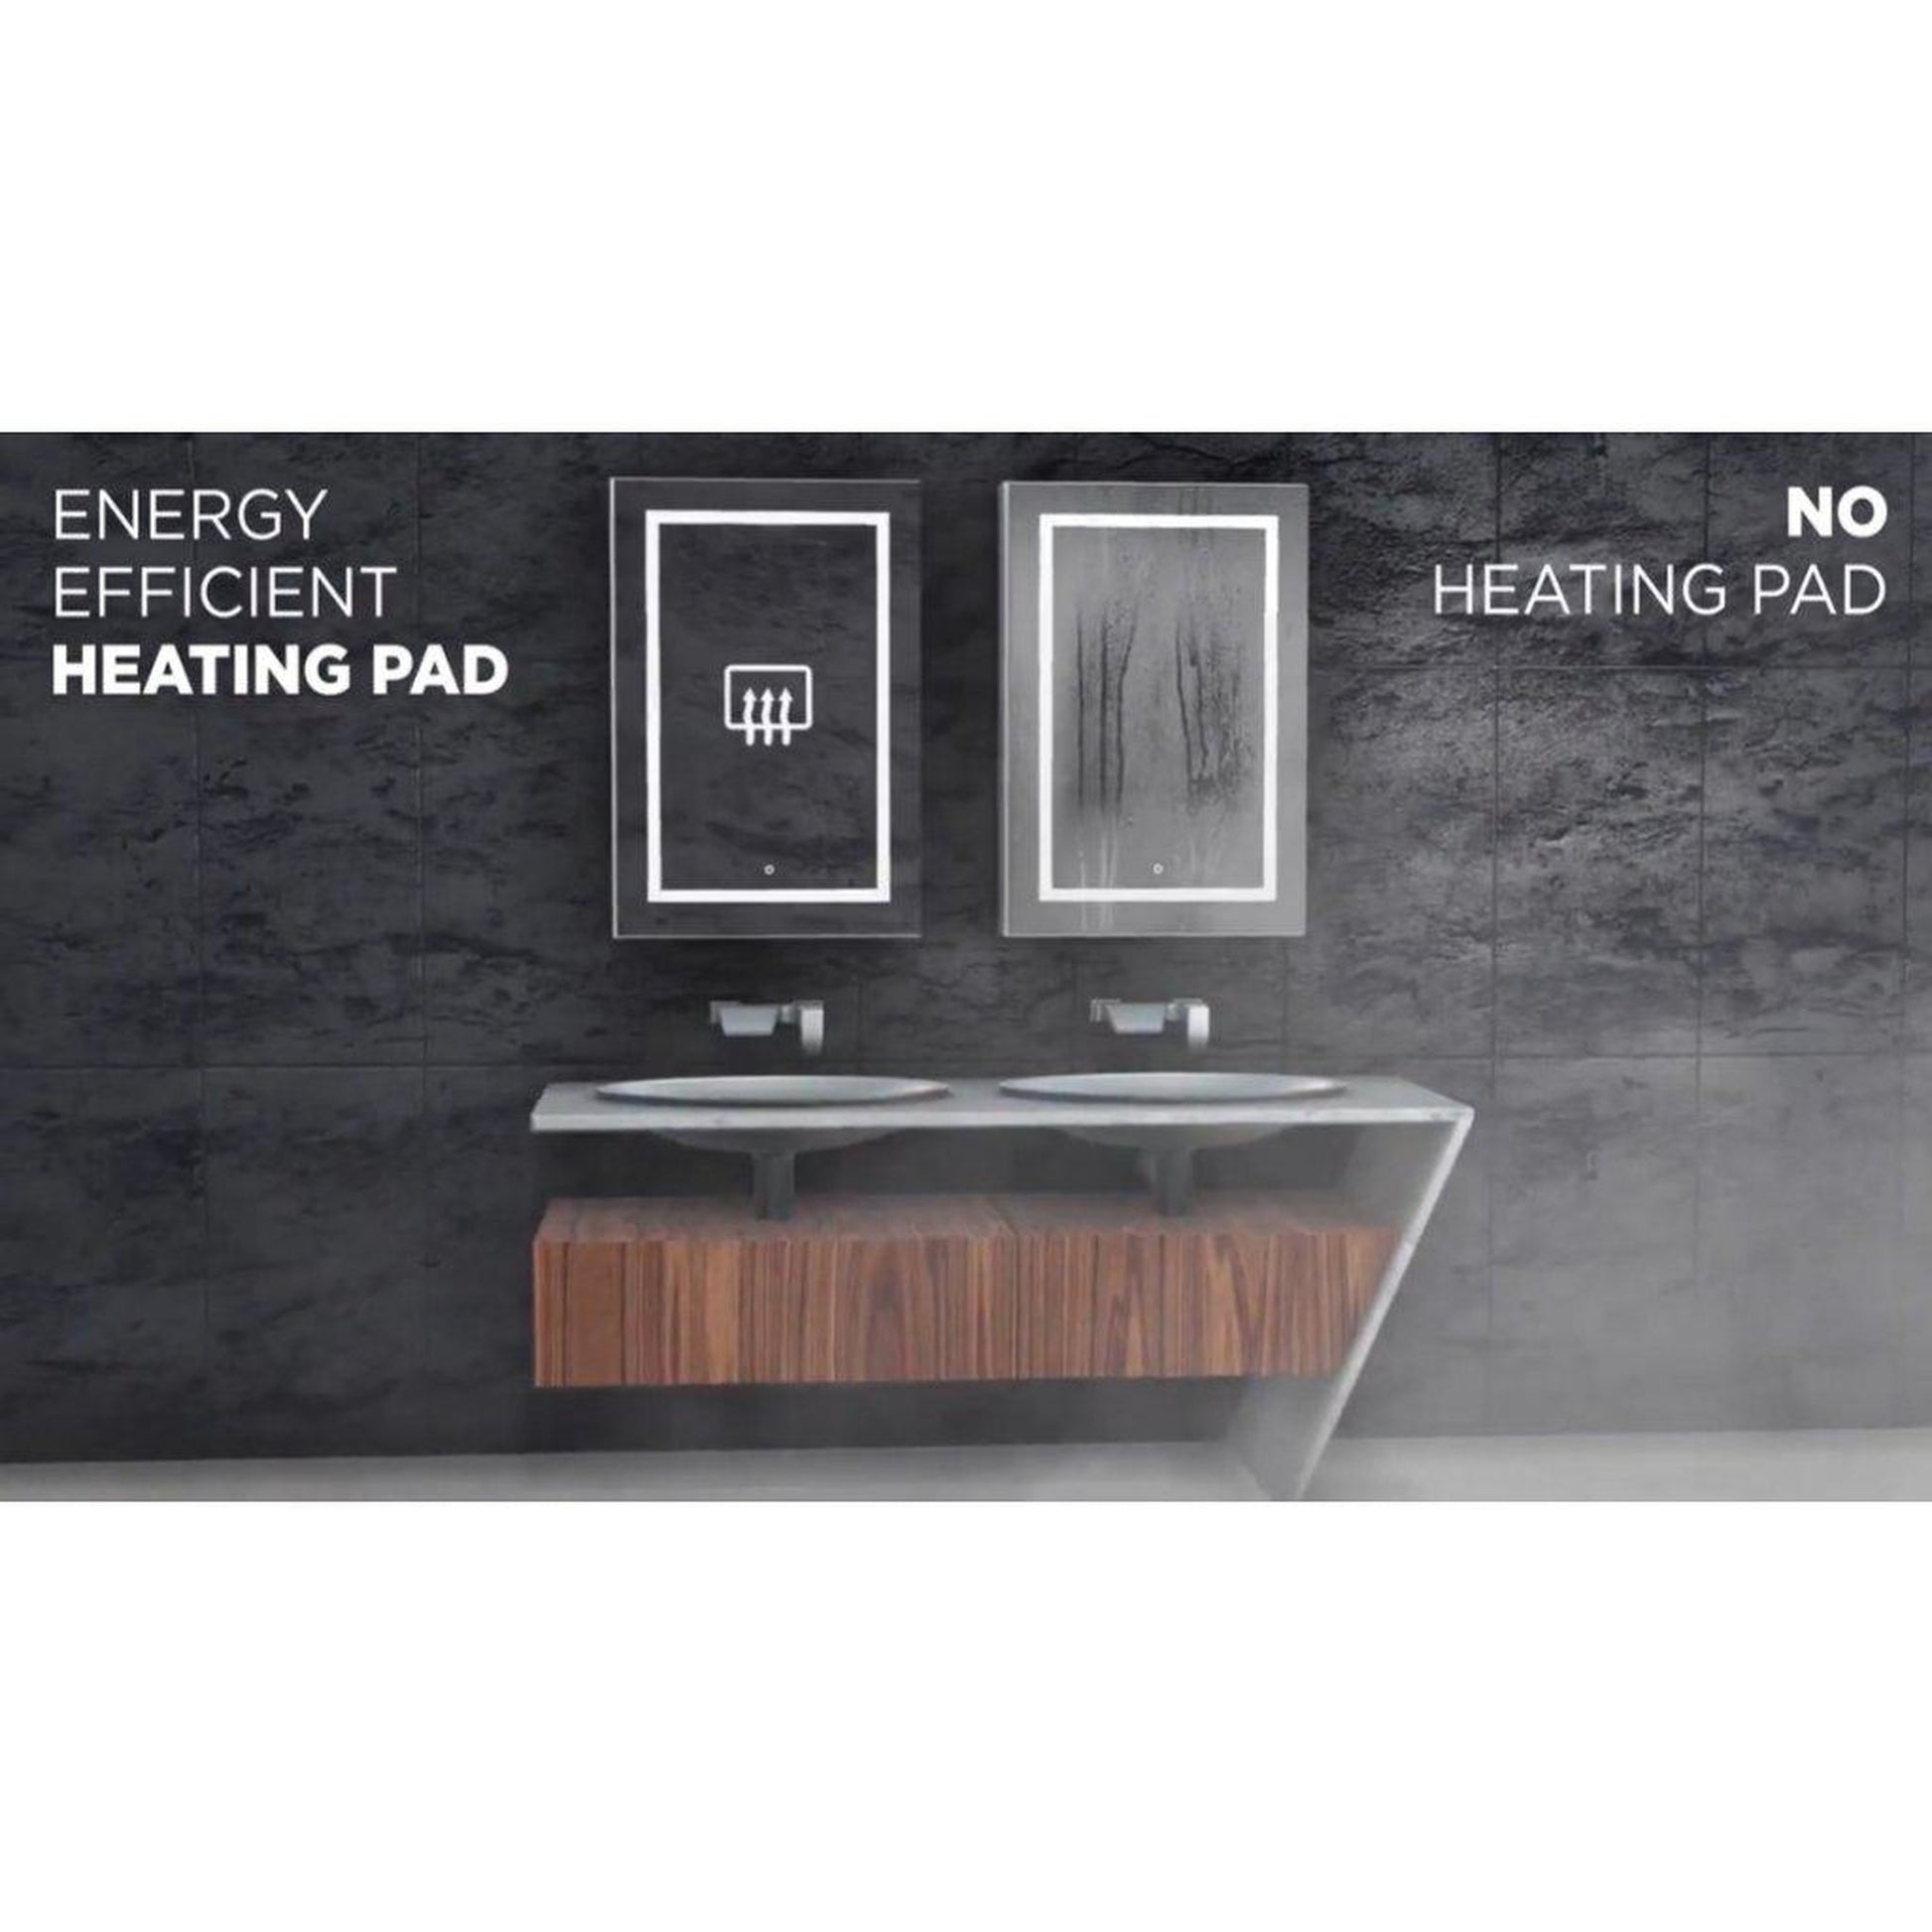 Krugg Reflections Sol 22" x 22" 5000K Round Wall-Mounted Illuminated Silver Backed LED Mirror With Built-in Defogger and Touch Sensor On/Off Built-in Dimmer